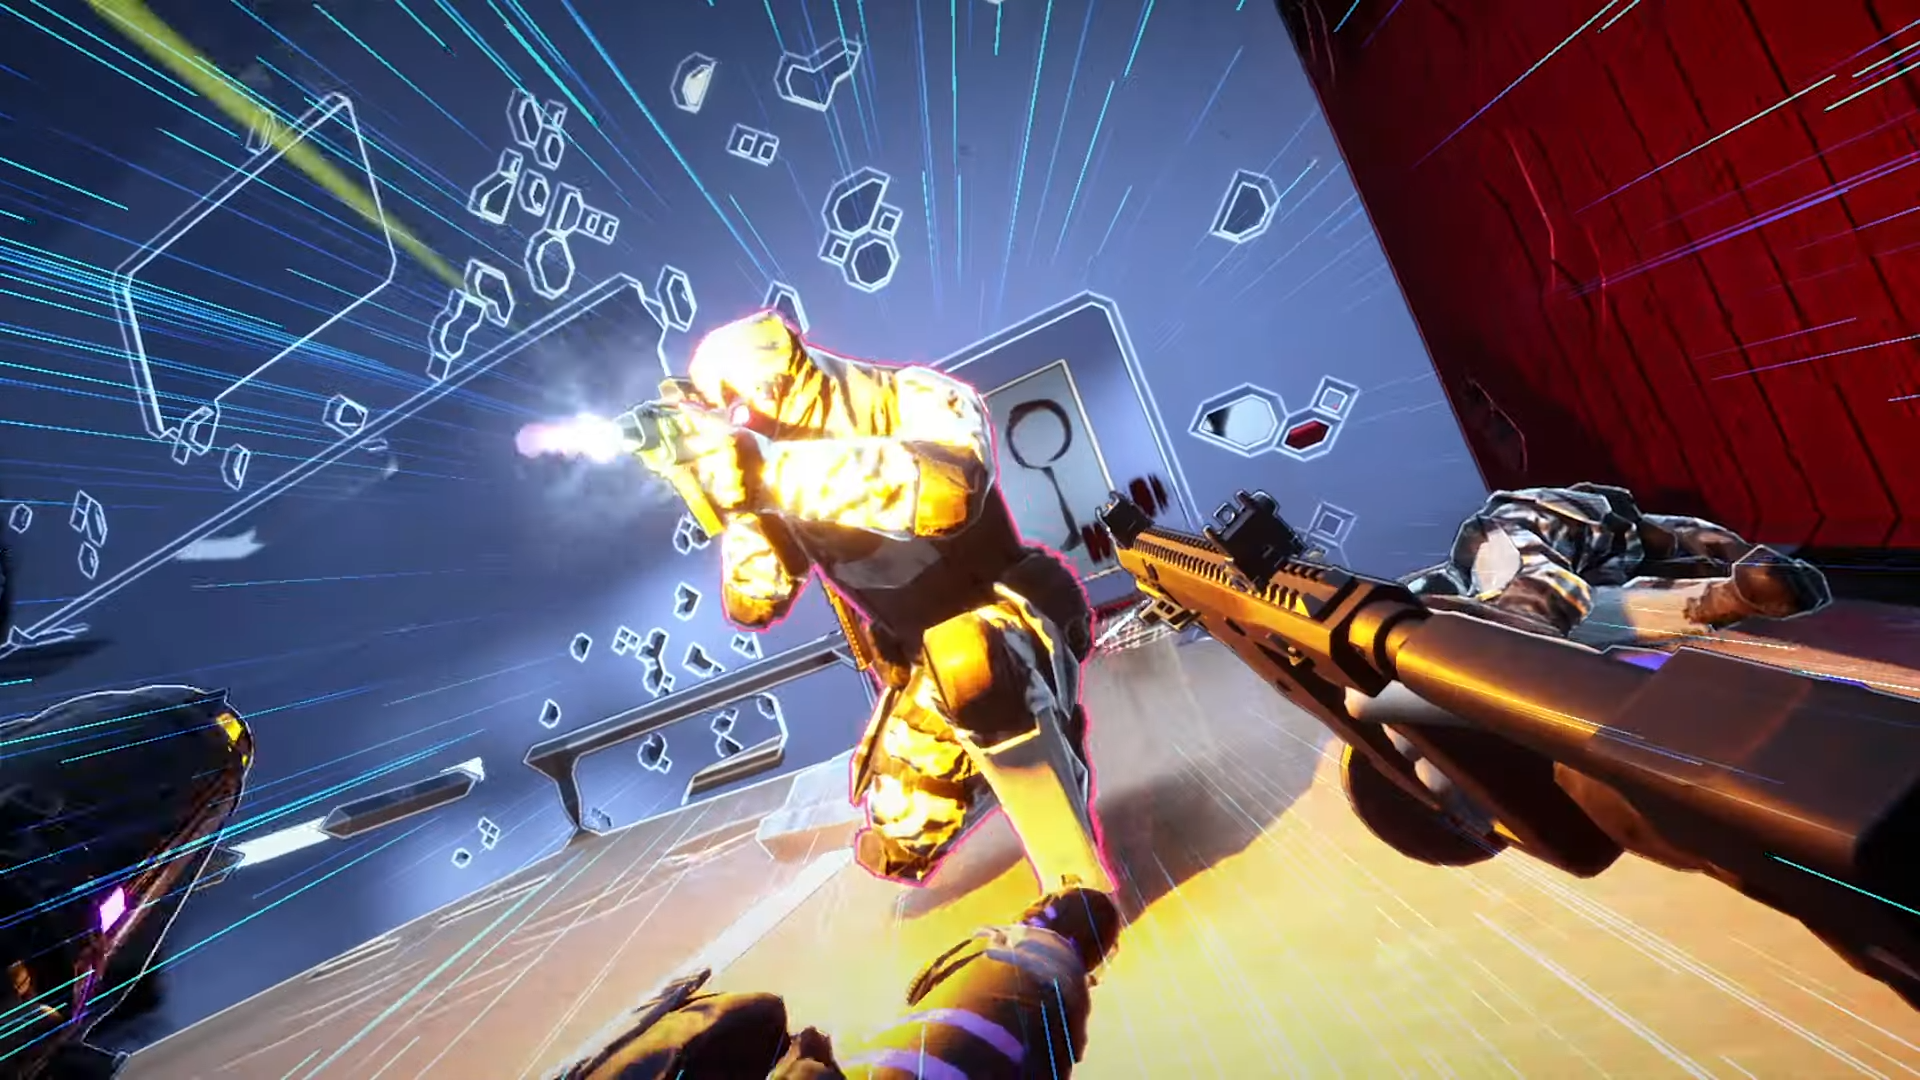 The spectacular parkour shooter Severed Steel will be released on consoles in July